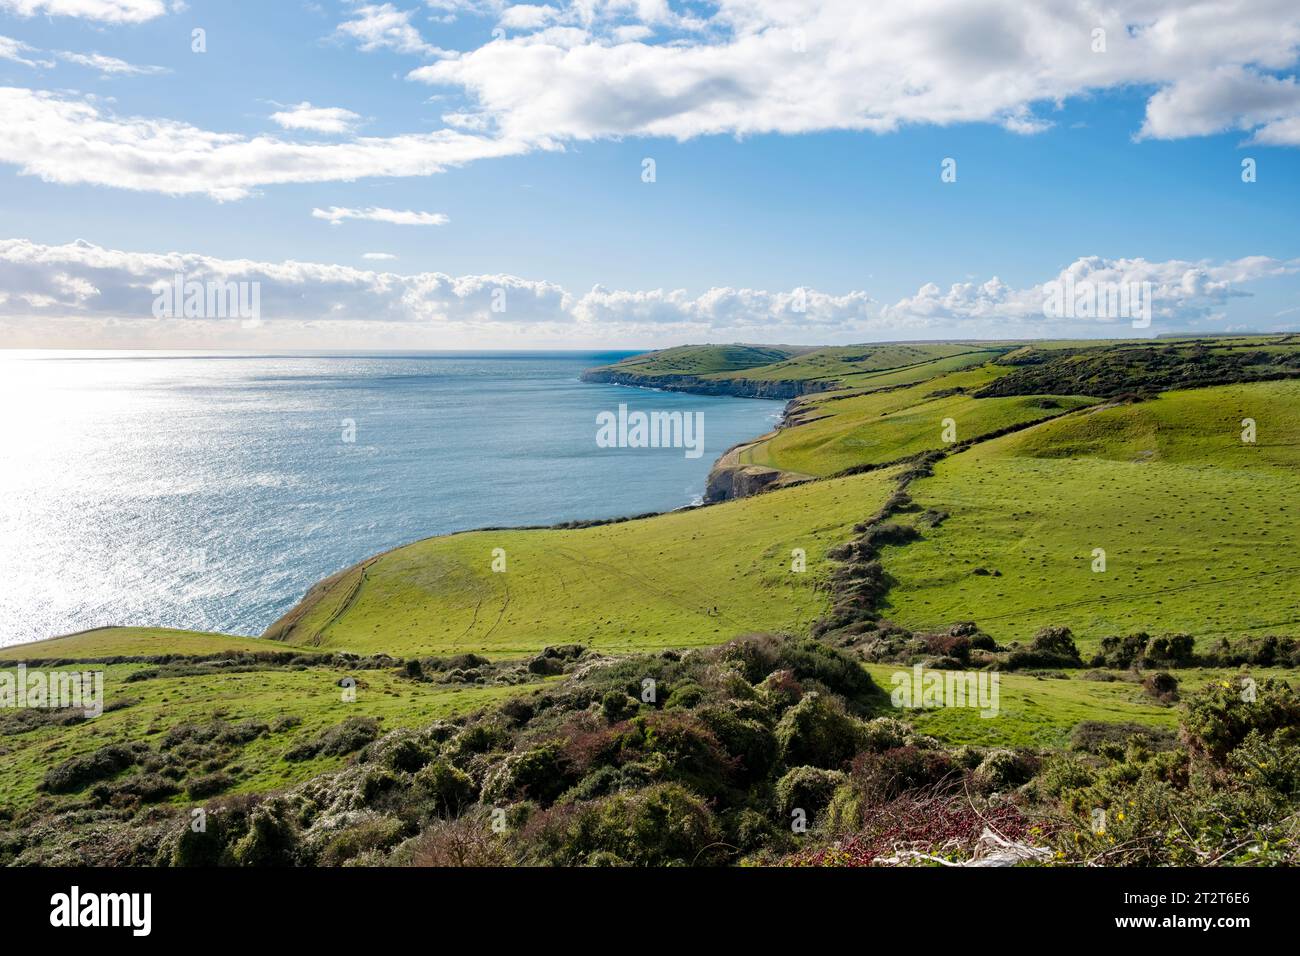 A view along the South West Coast Path on the Isle of Purbeck Dorset England. The view is from Anvil Point towards Dancing Ledge and beyond Stock Photo